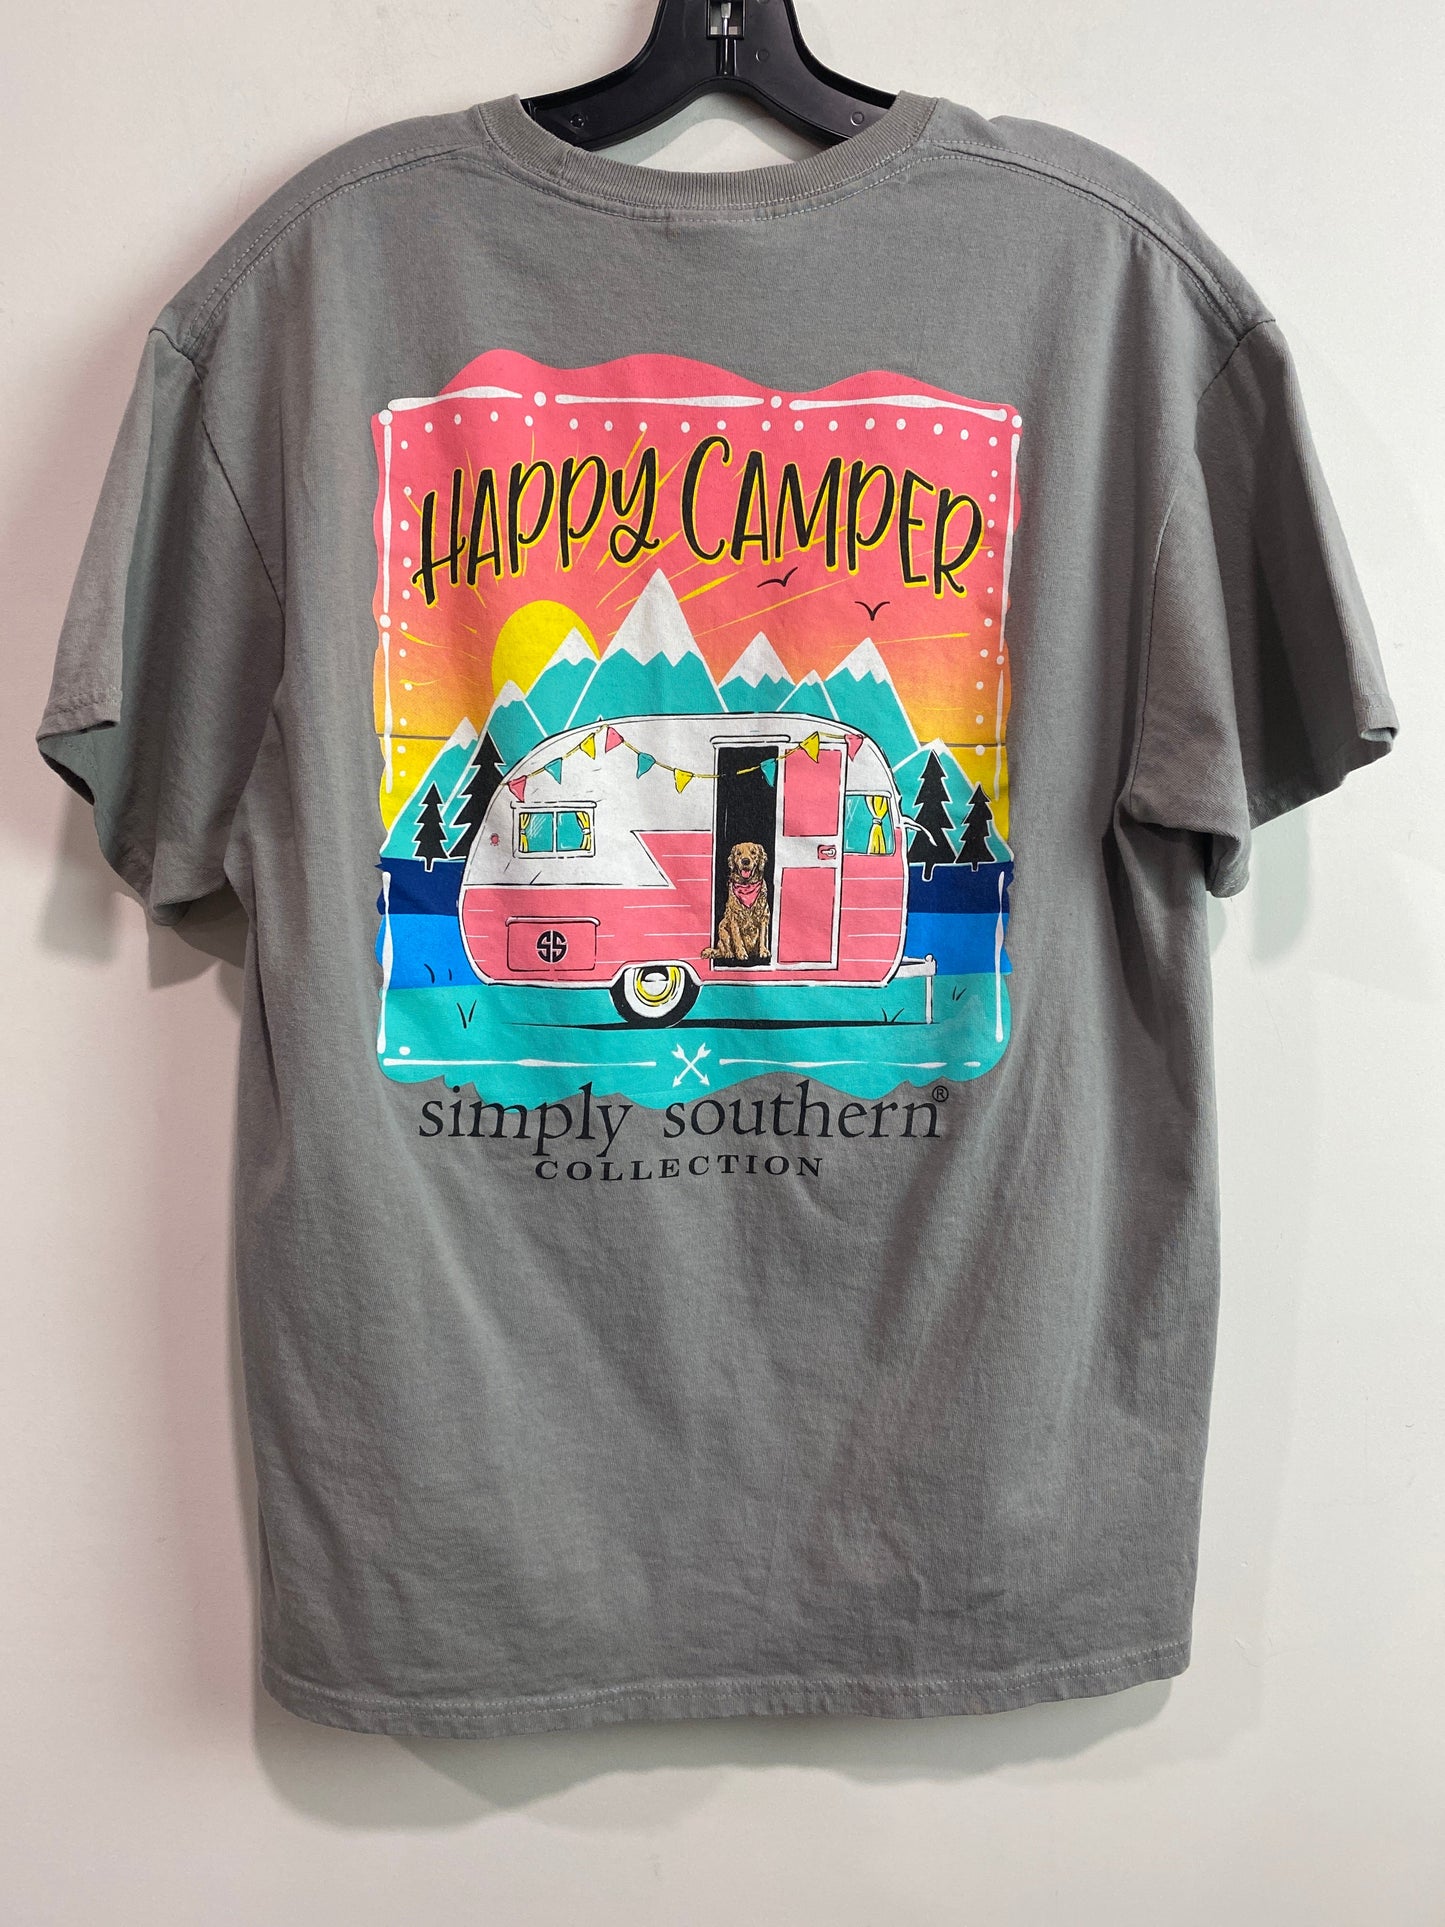 Grey Top Short Sleeve Simply Southern, Size L